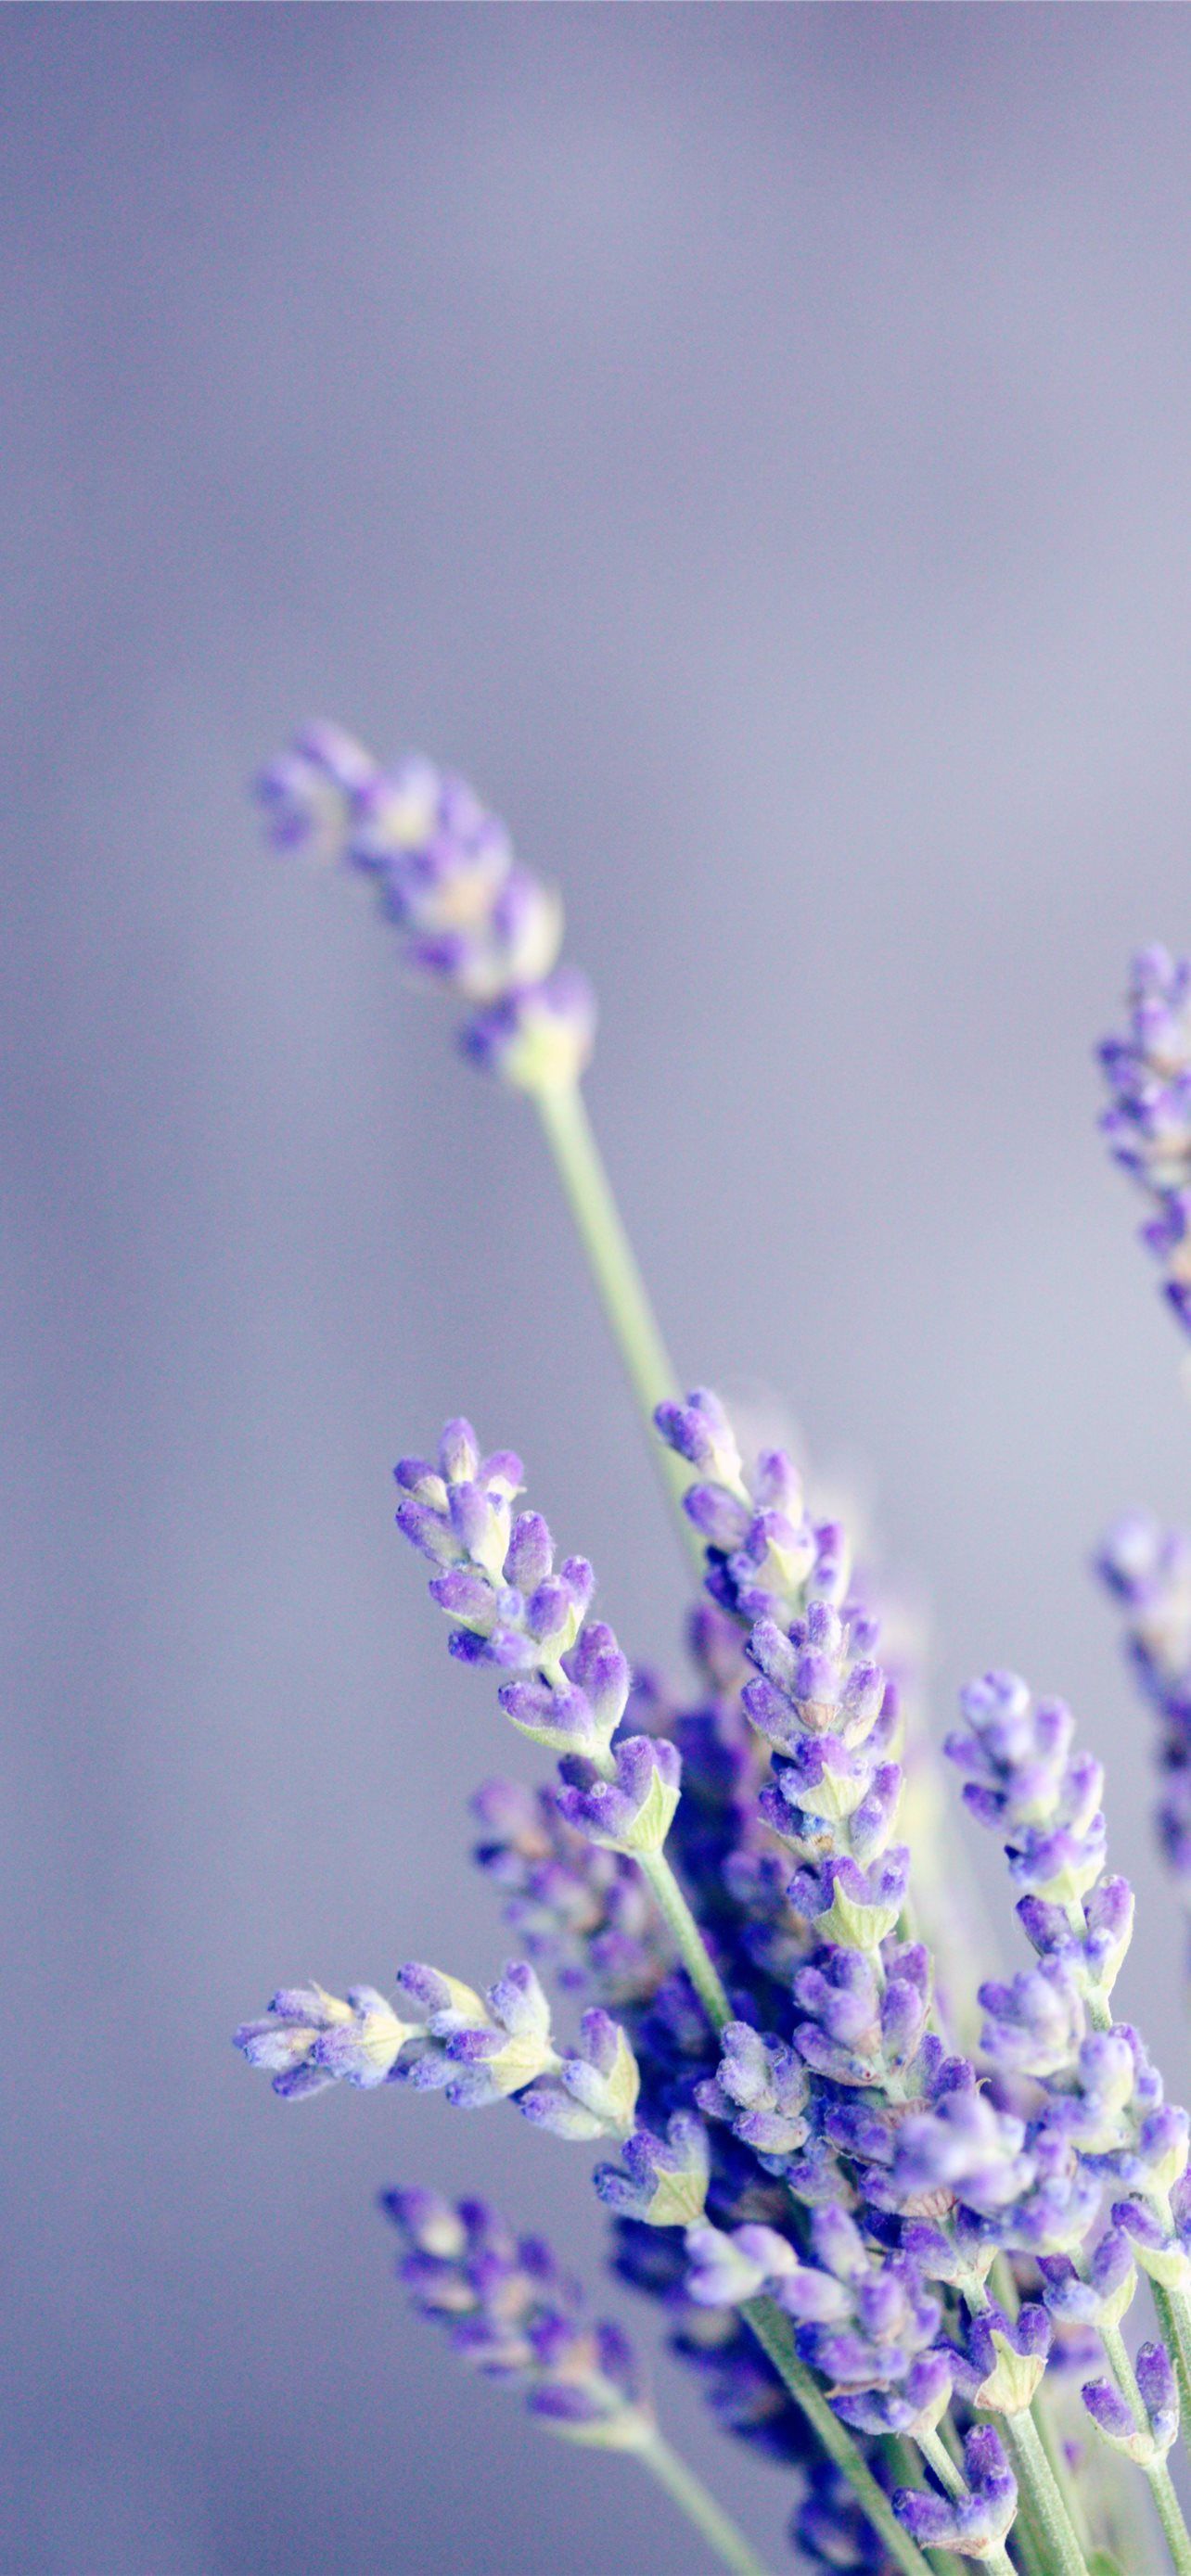 A bouquet of lavender flowers in front of a purple background. - Lavender